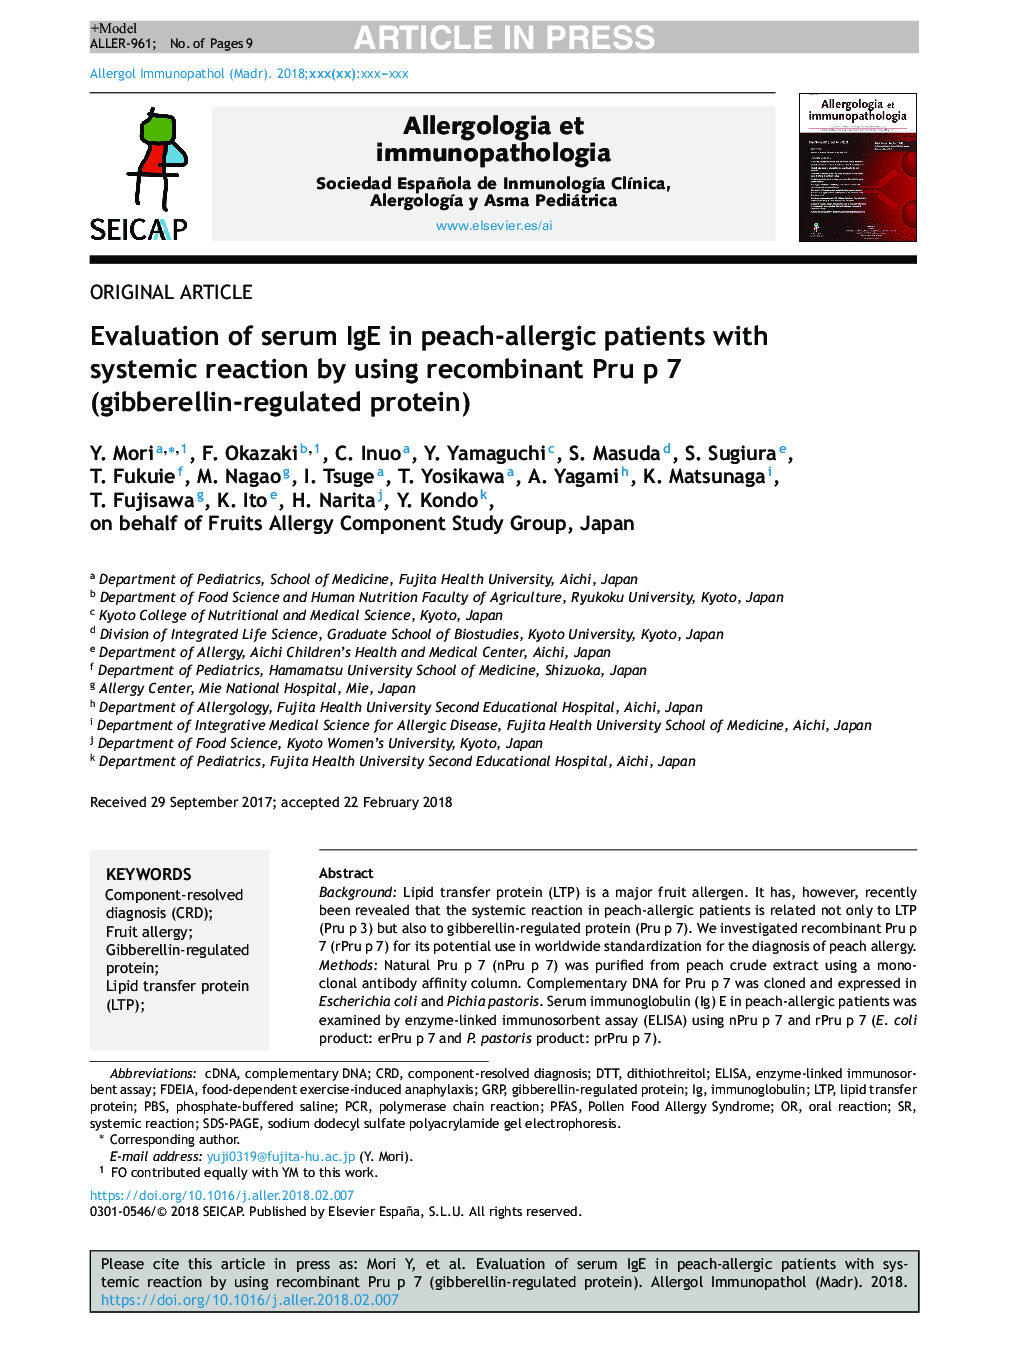 Evaluation of serum IgE in peach-allergic patients with systemic reaction by using recombinant Pru p 7 (gibberellin-regulated protein)